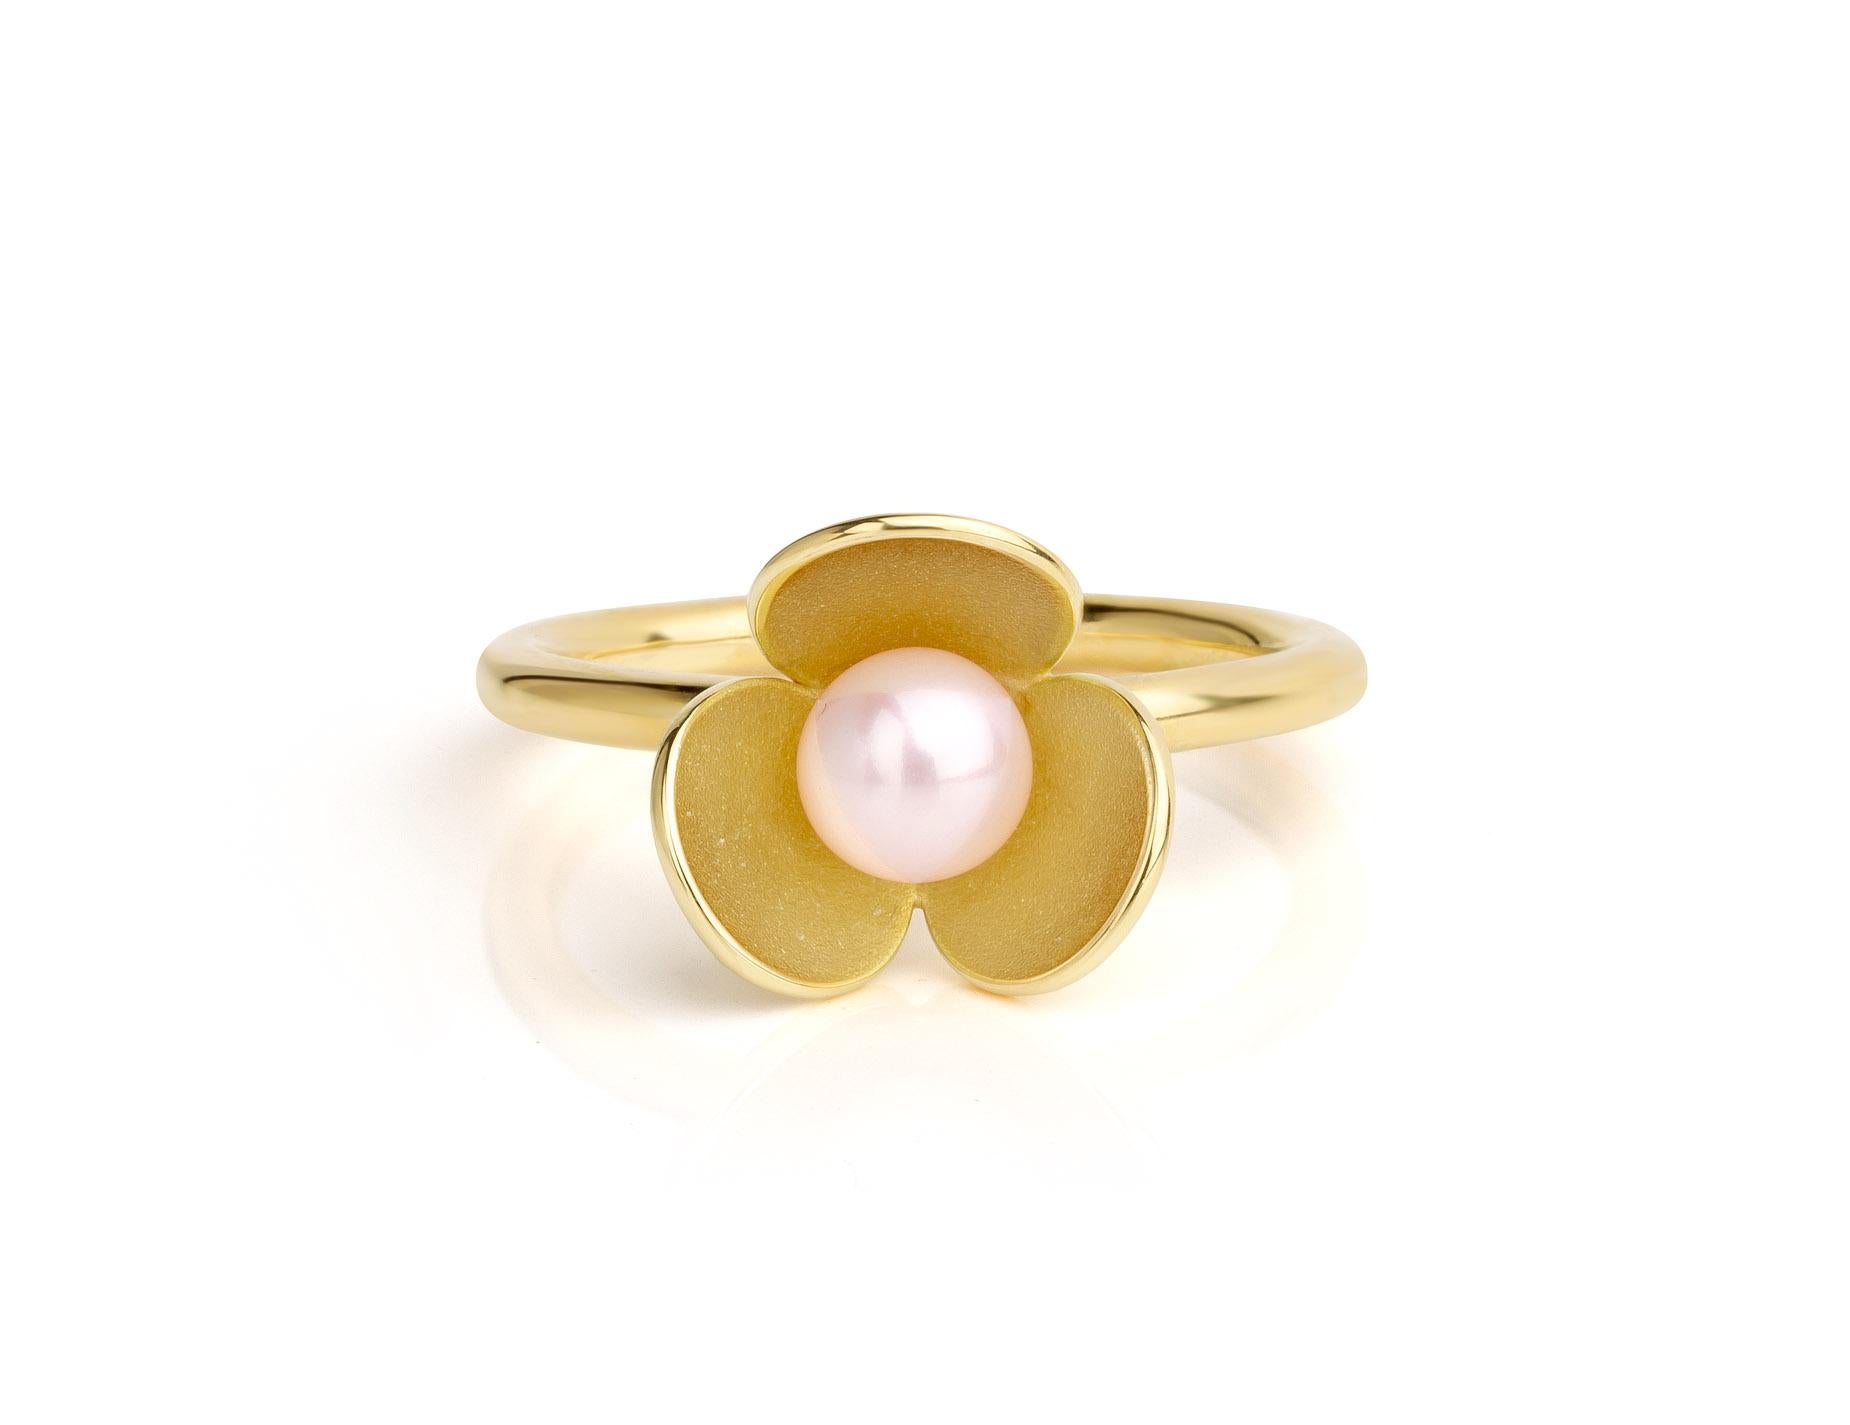 New flower ring with excellent quality light pink color fresh water pearl. 
Beautiful in its simplicity. 
Would look great with a wedding dress but it's design is also timeless!
Hand made of 18 karat yellow gold by master goldsmith Eva Theuerzeit